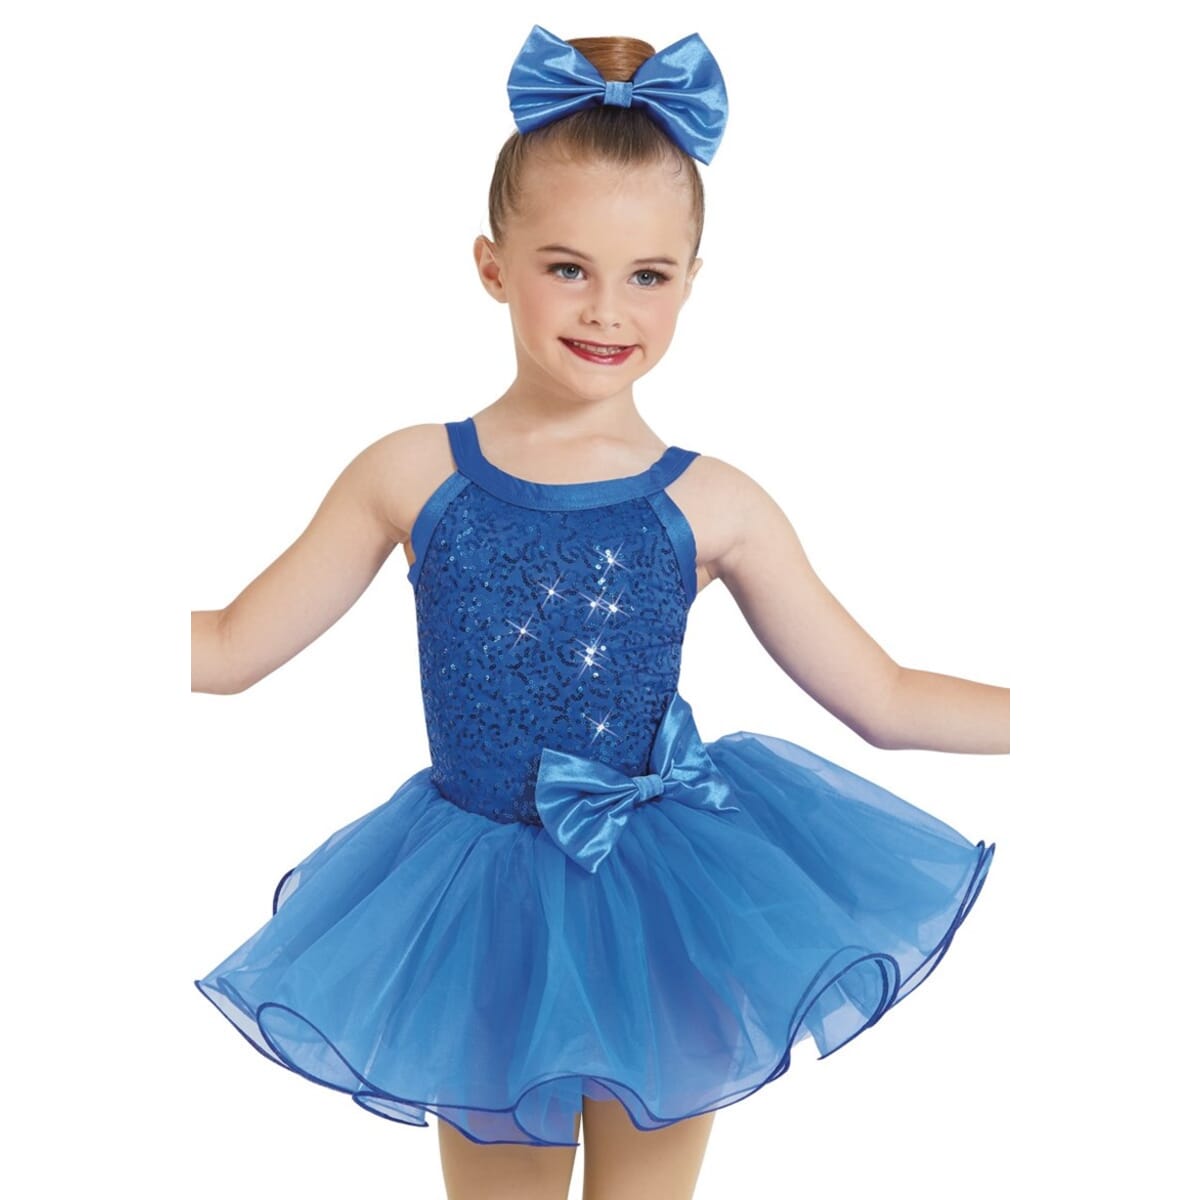 Hire Birthday Girl Blue from Costume Source | Ballet dance costume for hire